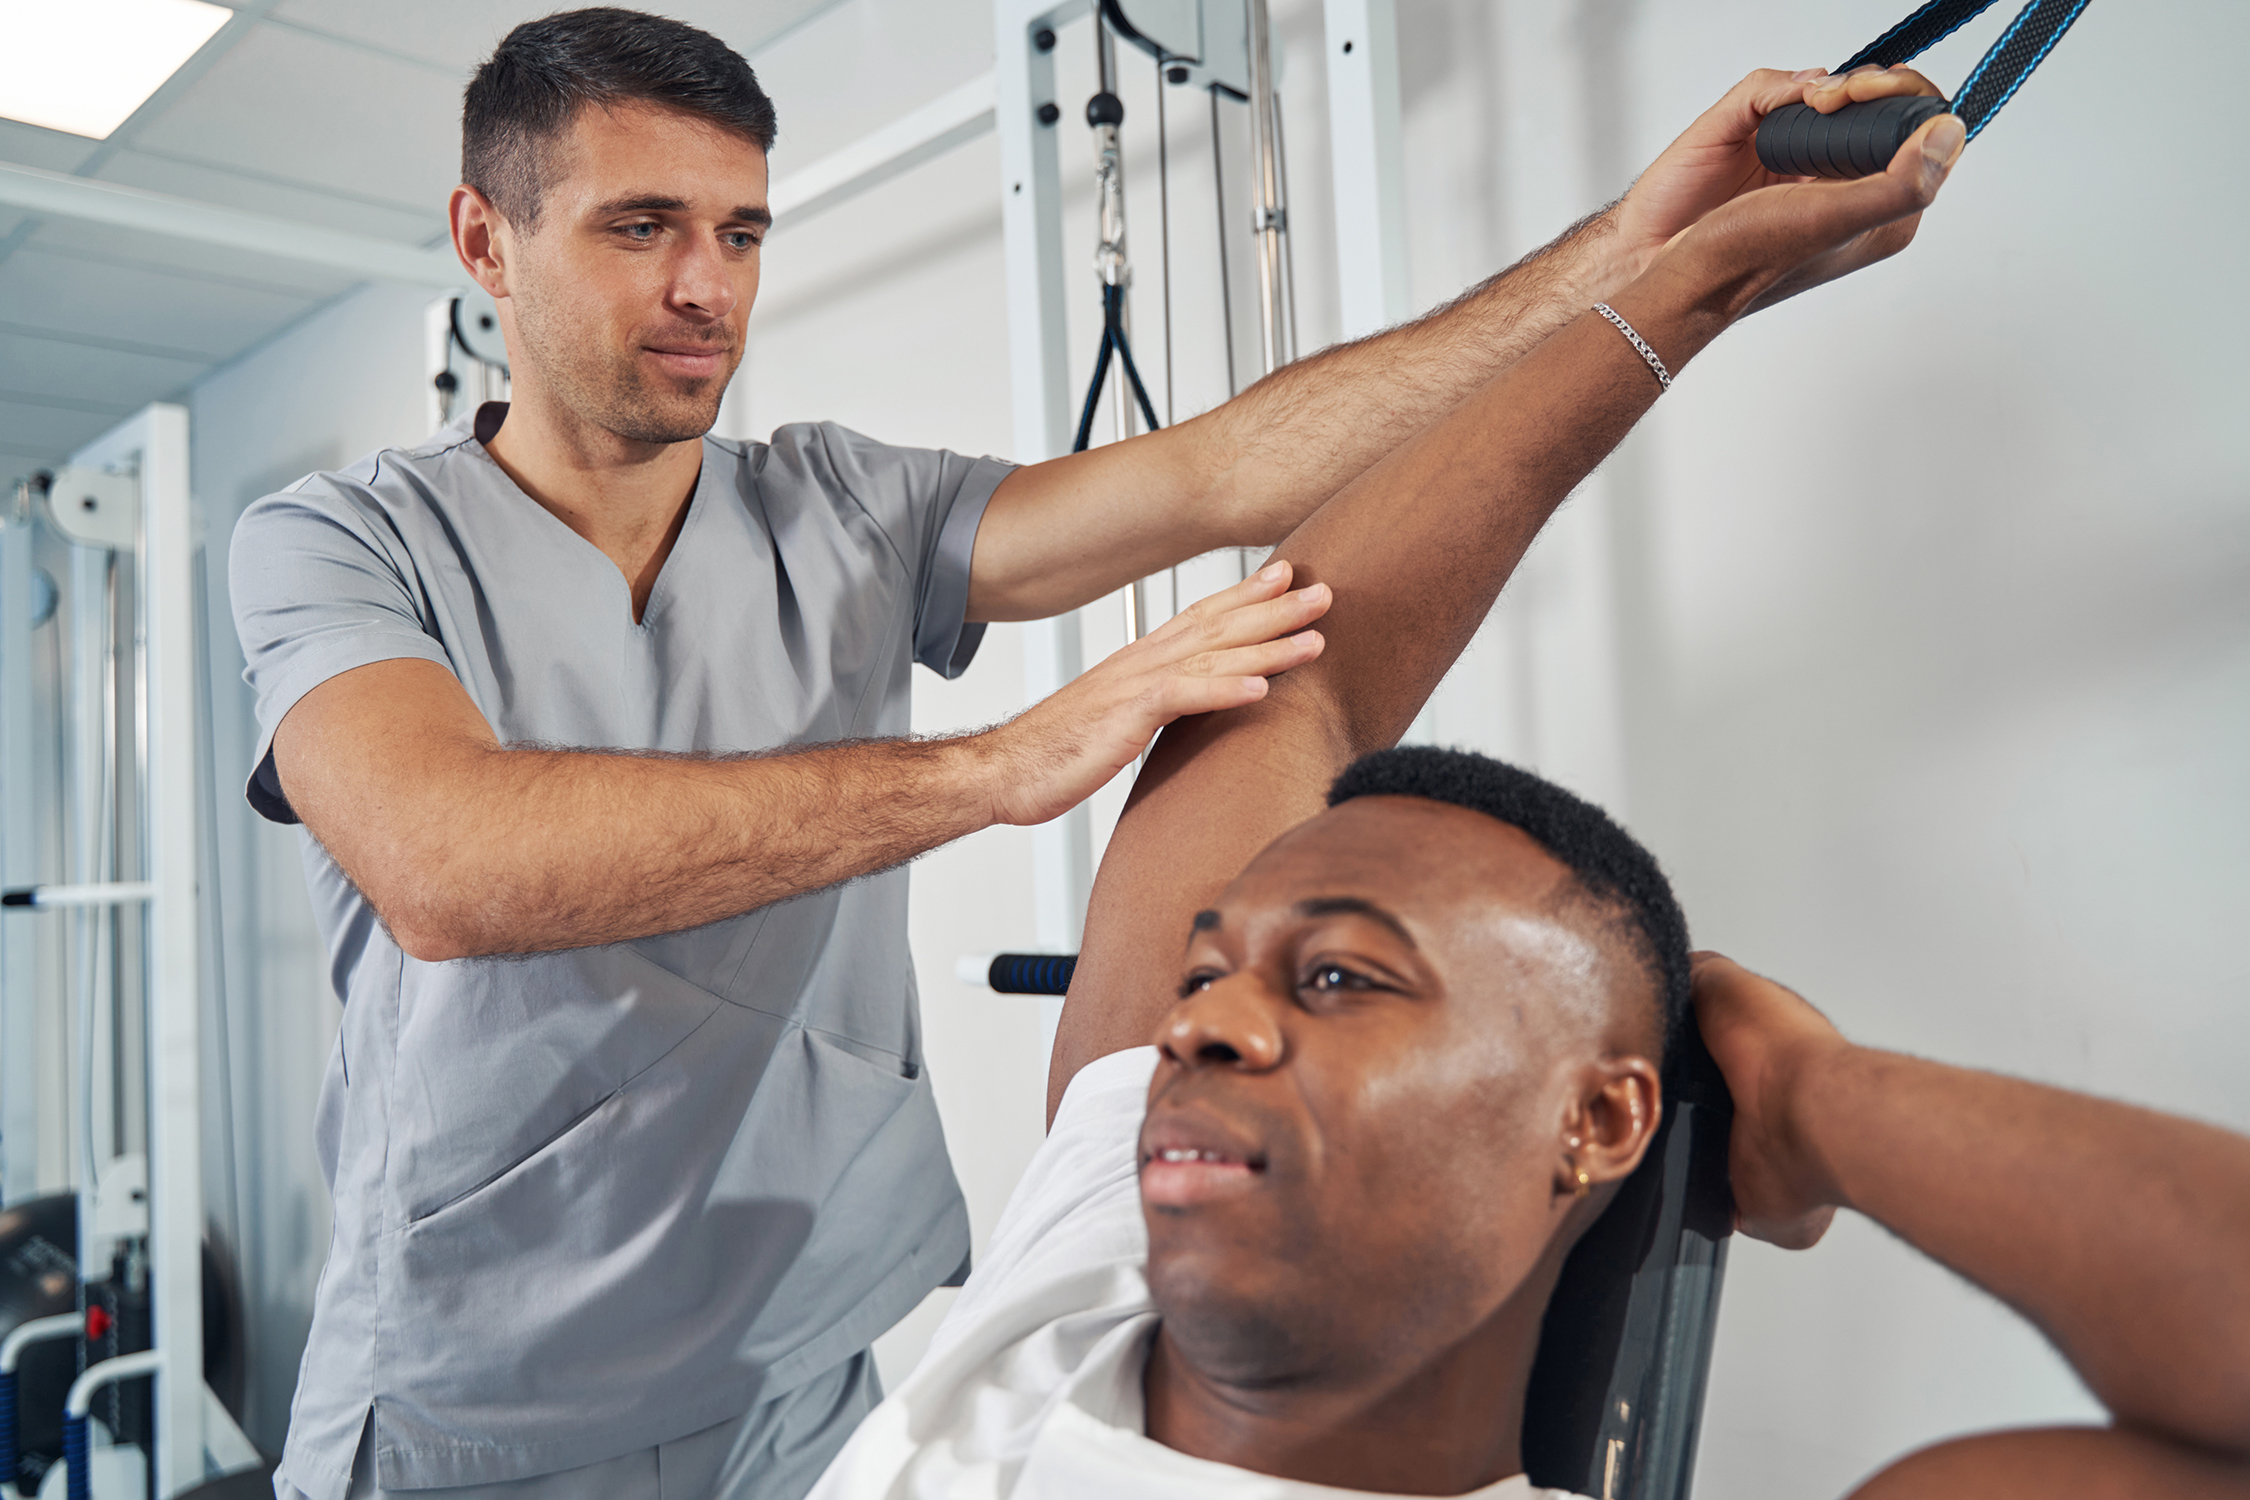 Top 10 Benefits of Physical Therapy You Might Not Know About